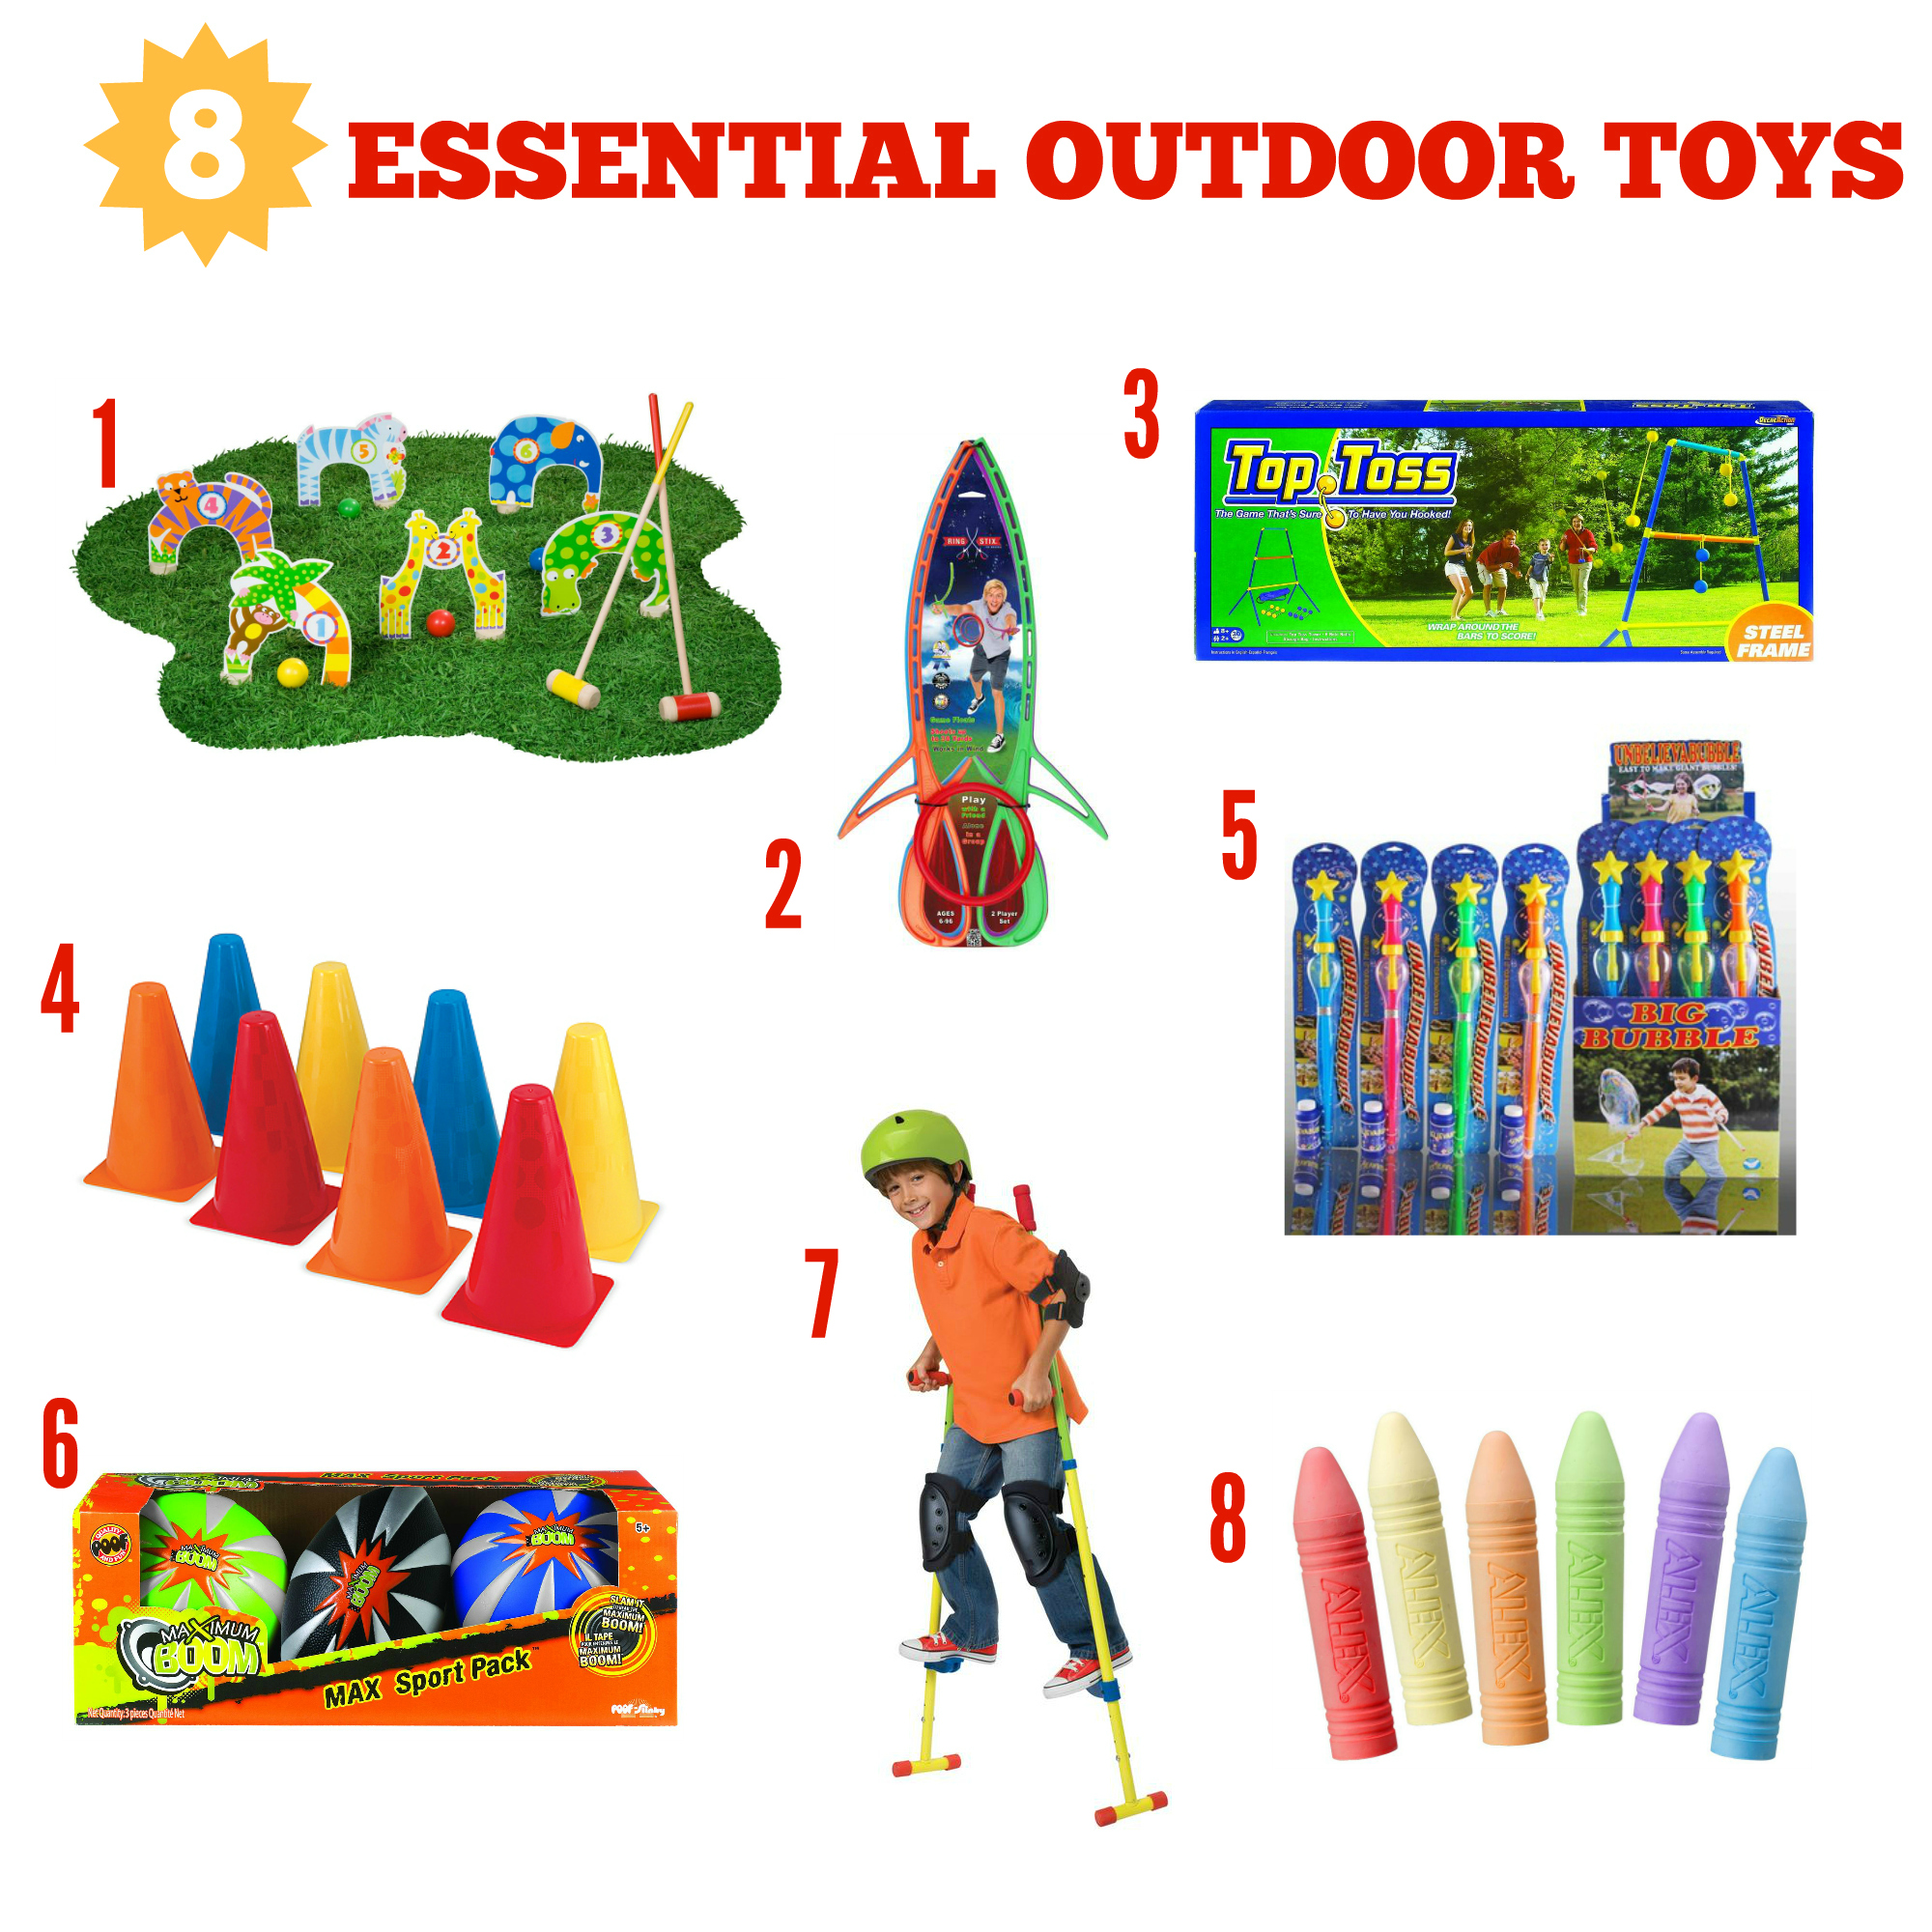 outdoor toys